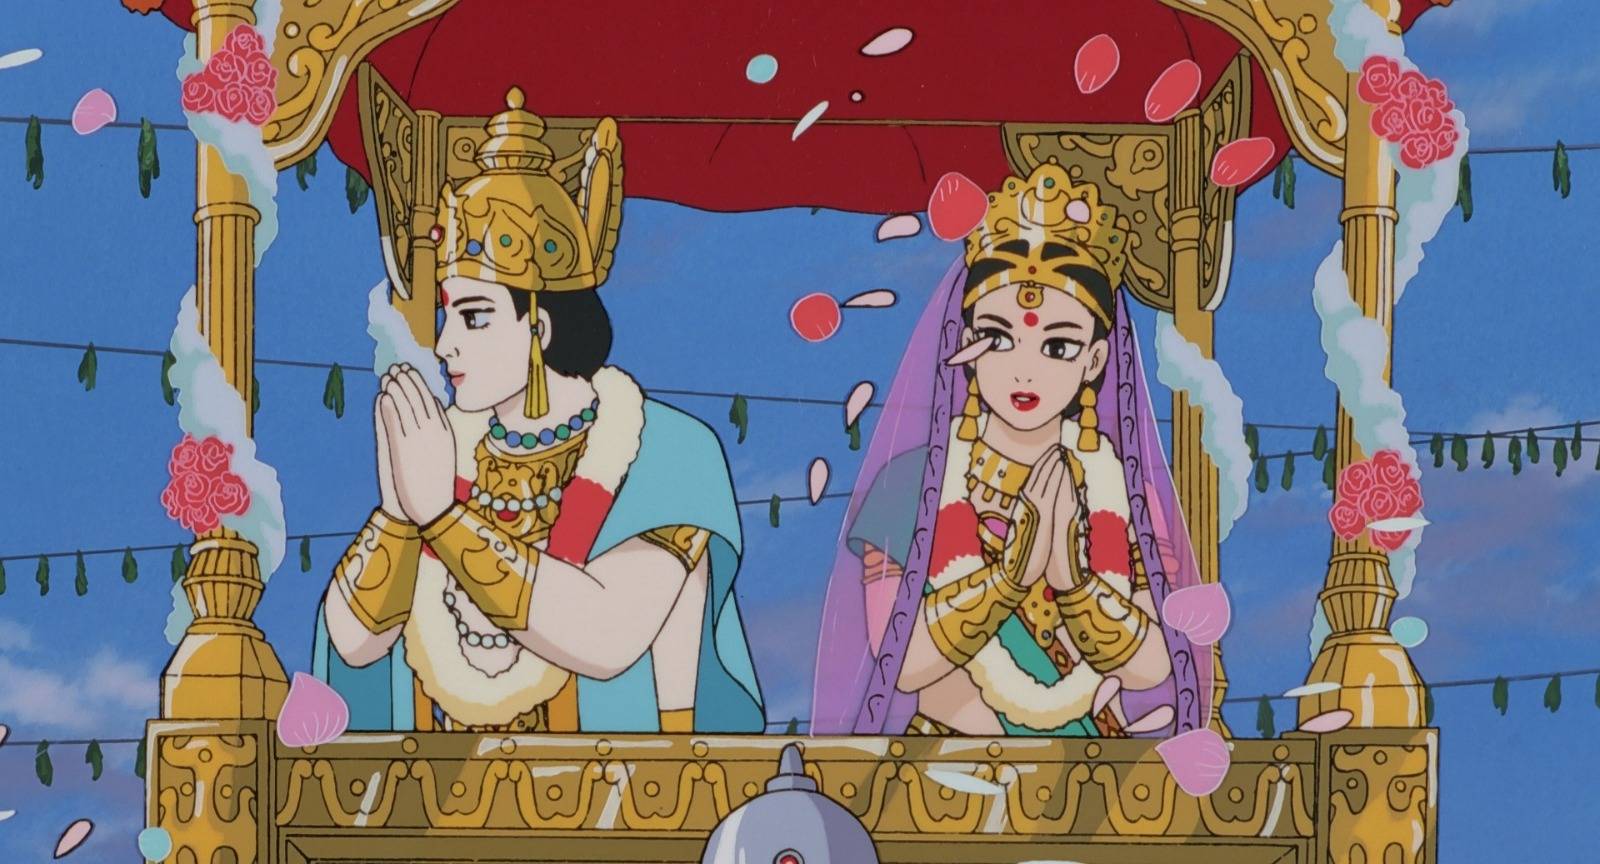 Groundbreaking 'Ramayana' anime remastered for new audience 30 years on |  The Japan Times